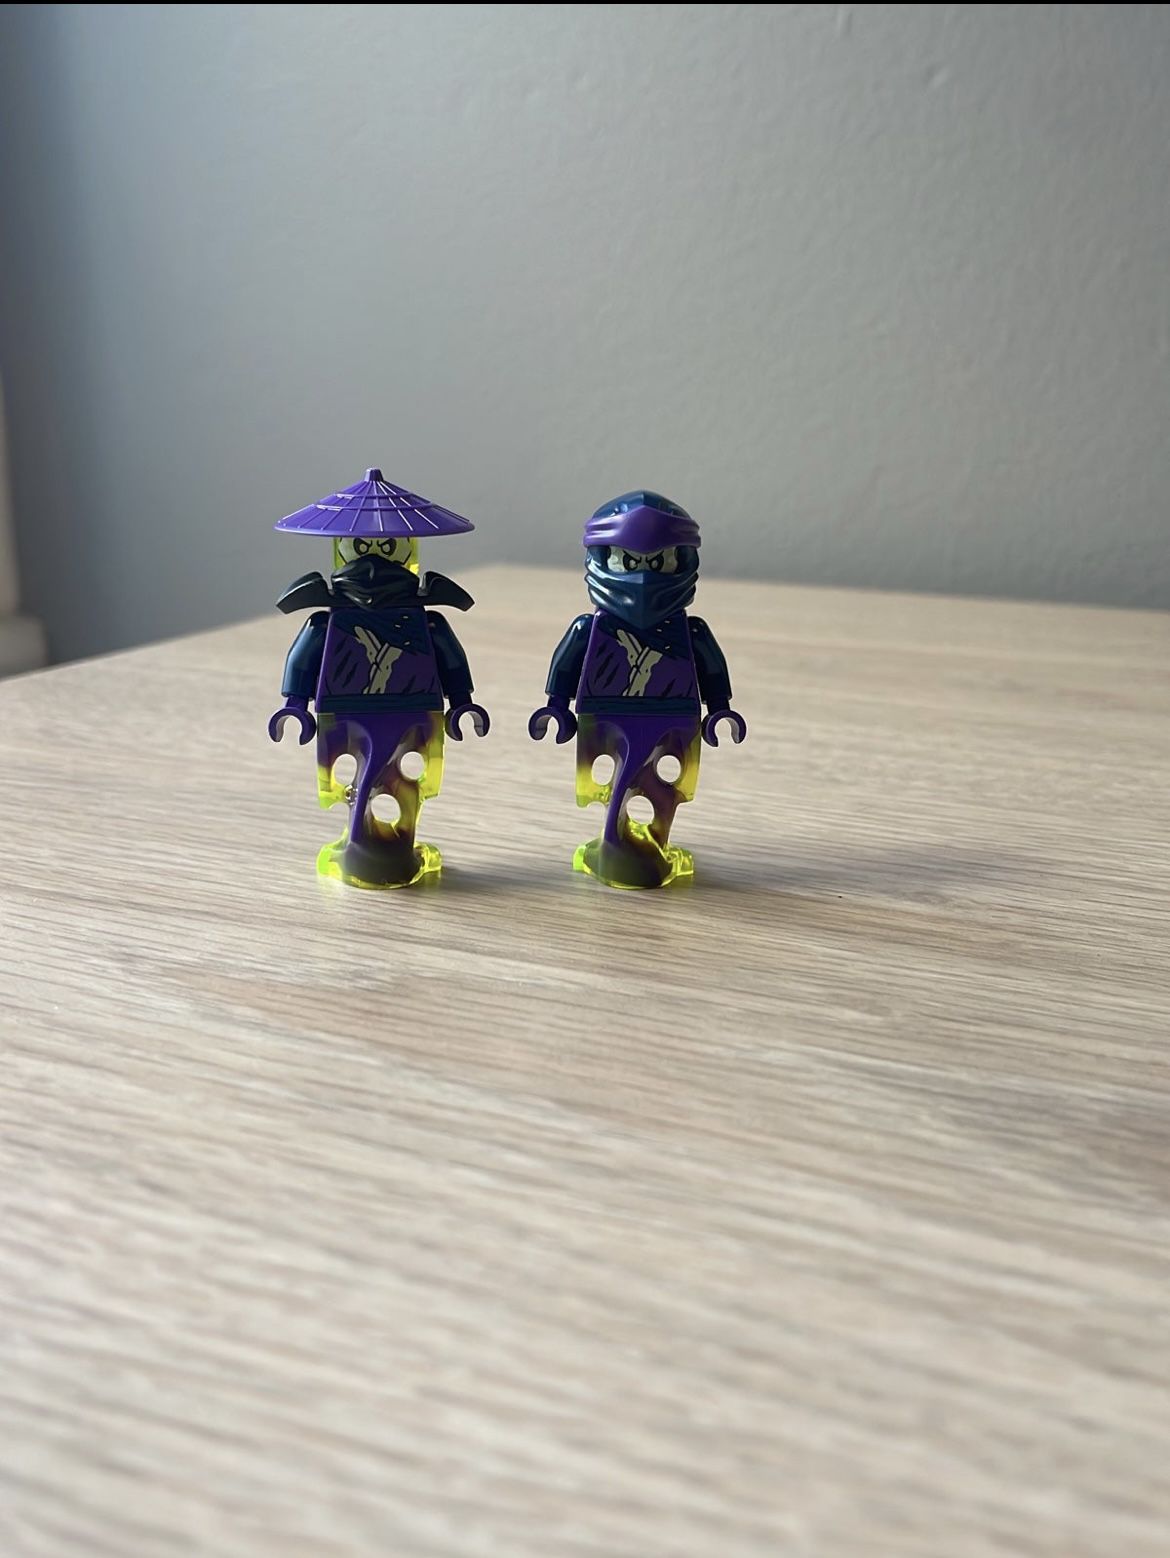 Lot two Lego ninjago ghost (njo644)and ghost (njo646)